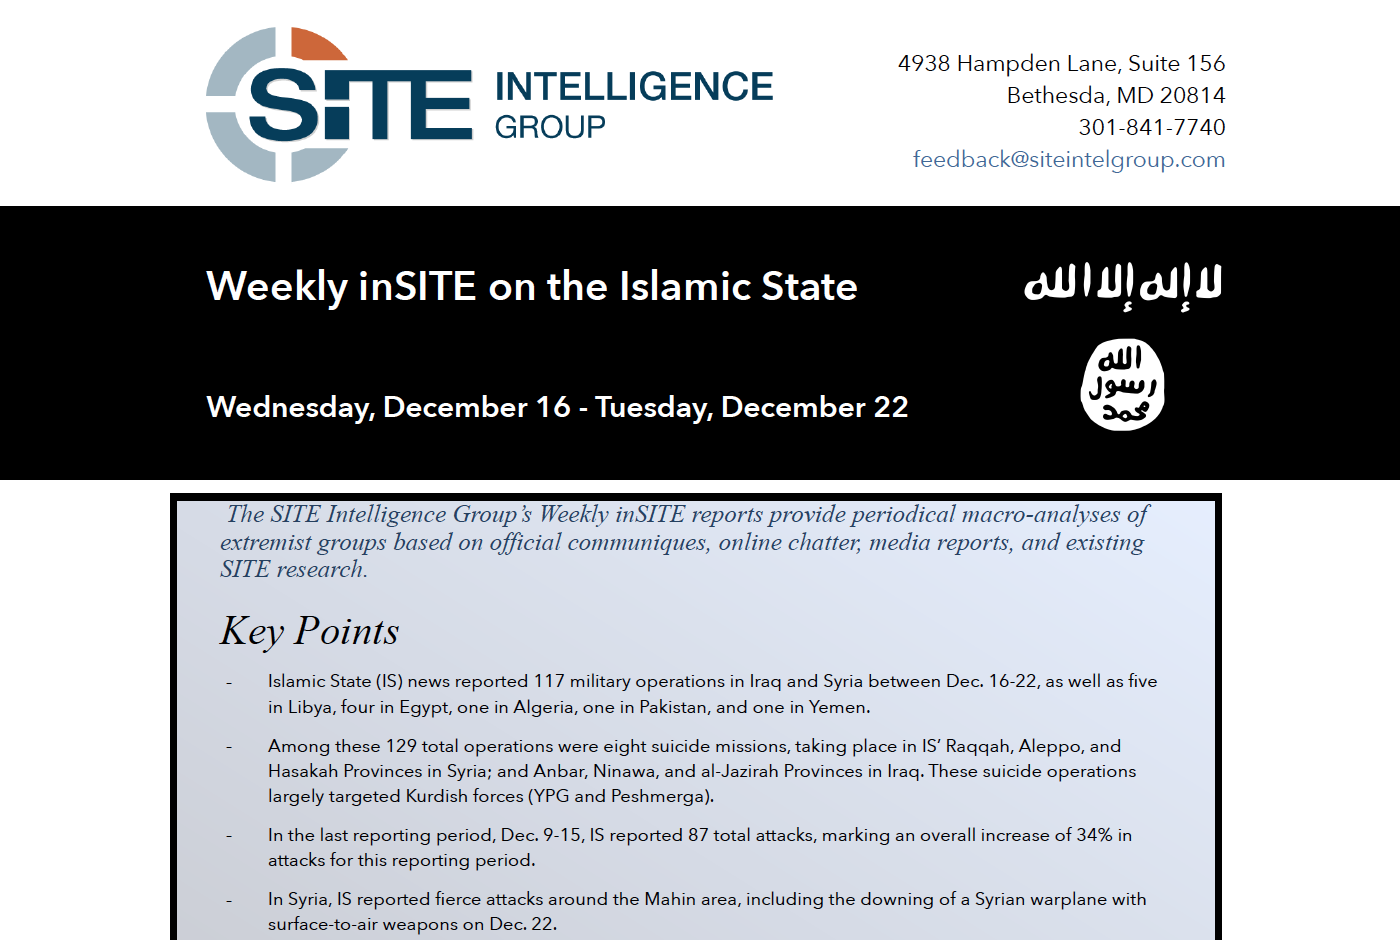 Weekly inSITE on the Islamic State, Dec 16 - 22, 2015